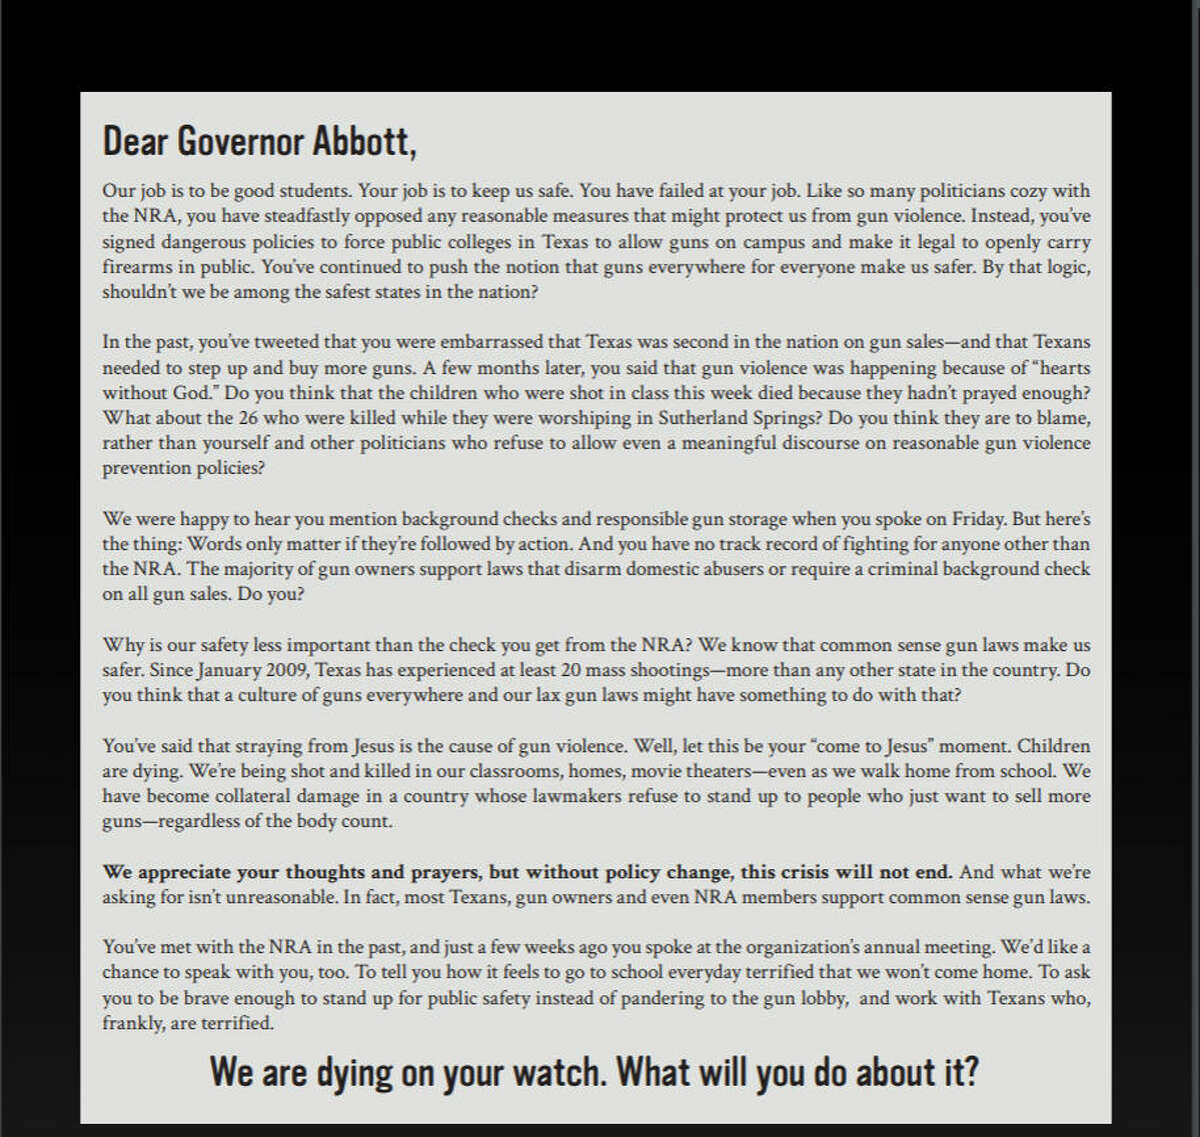 Everytown for Gun Safety released a full-page add in the Houston Chronicle on May 22, 2018 that told Texas Gov. Gregg Abbott, "We are dying on your watch. What will you do about it?"